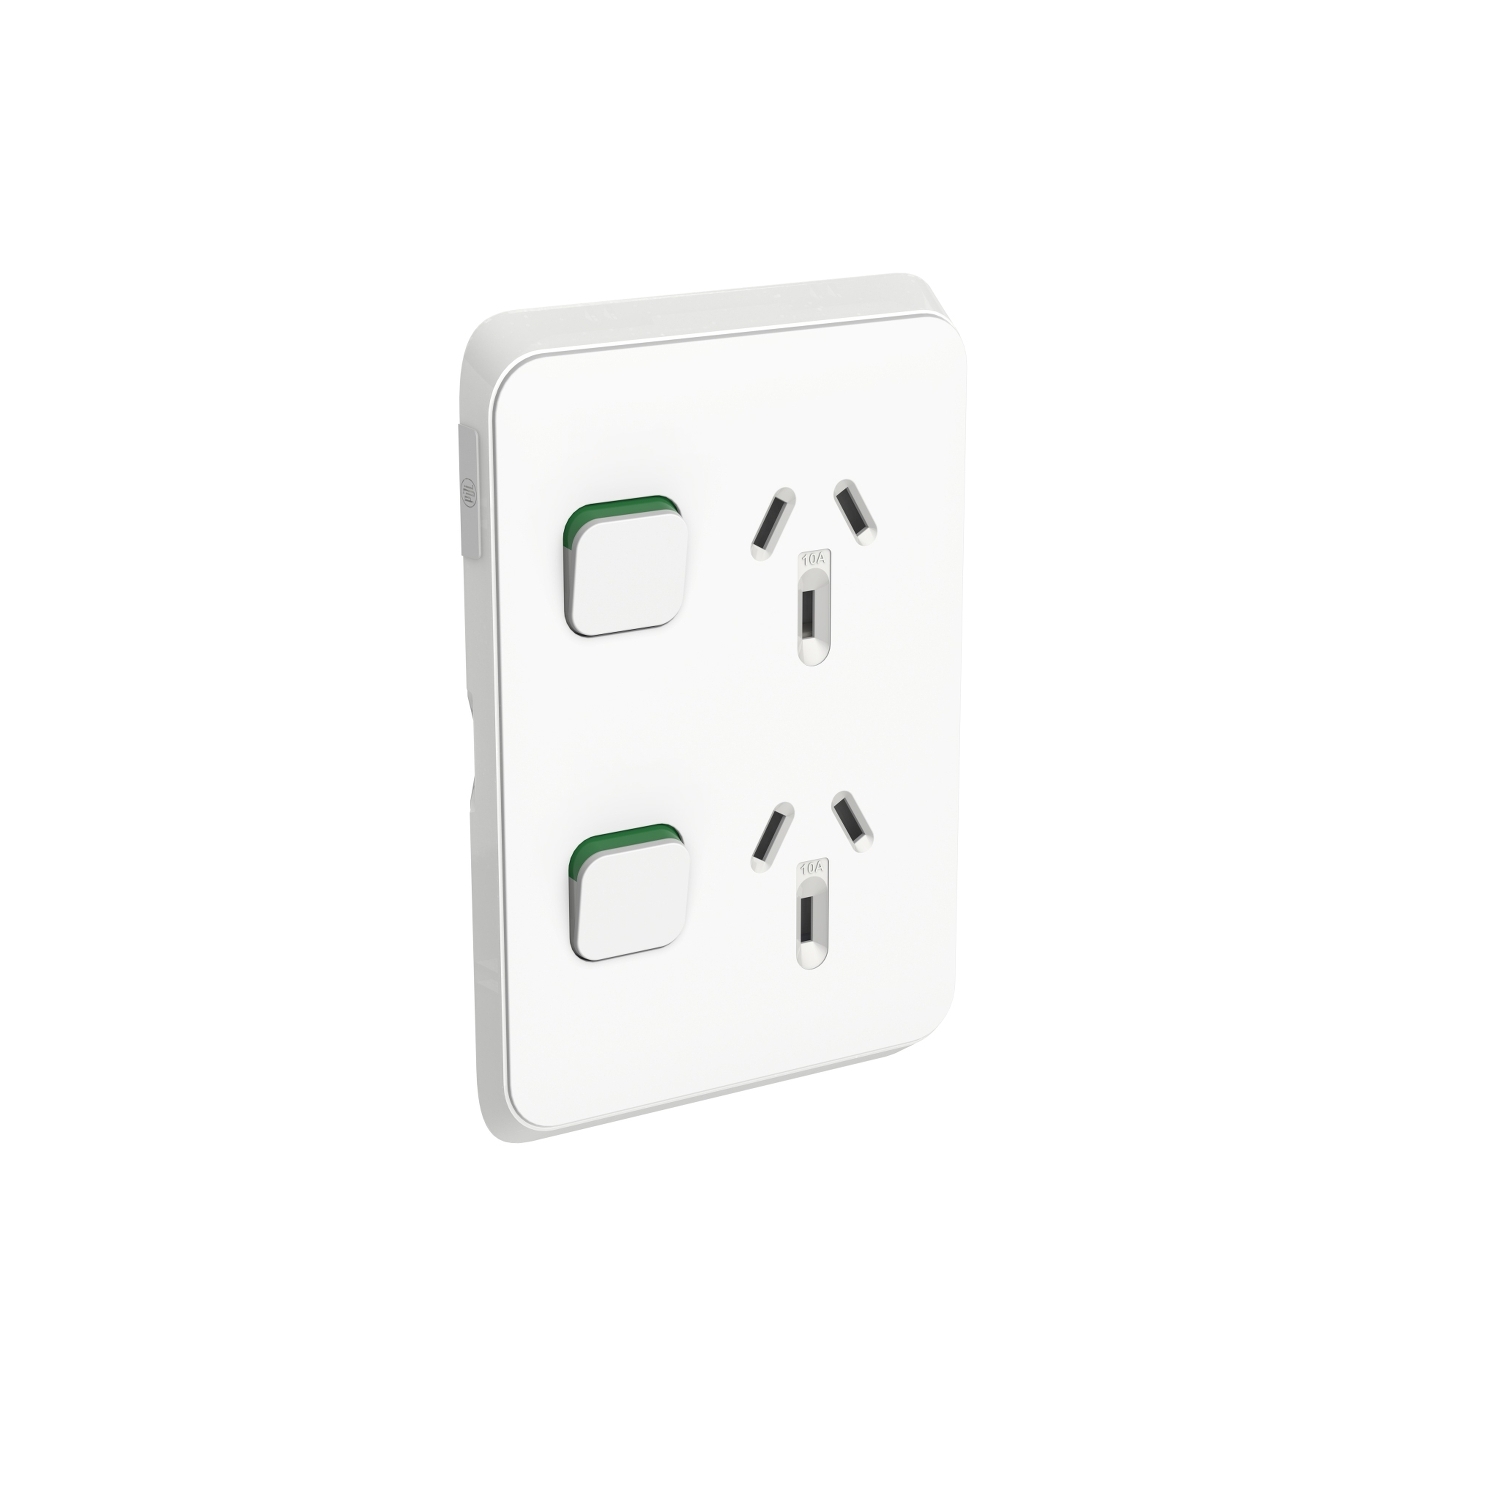 PDL392-VW - PDL Iconic Double Switched Socket Vertical 10Amp - Vivid White